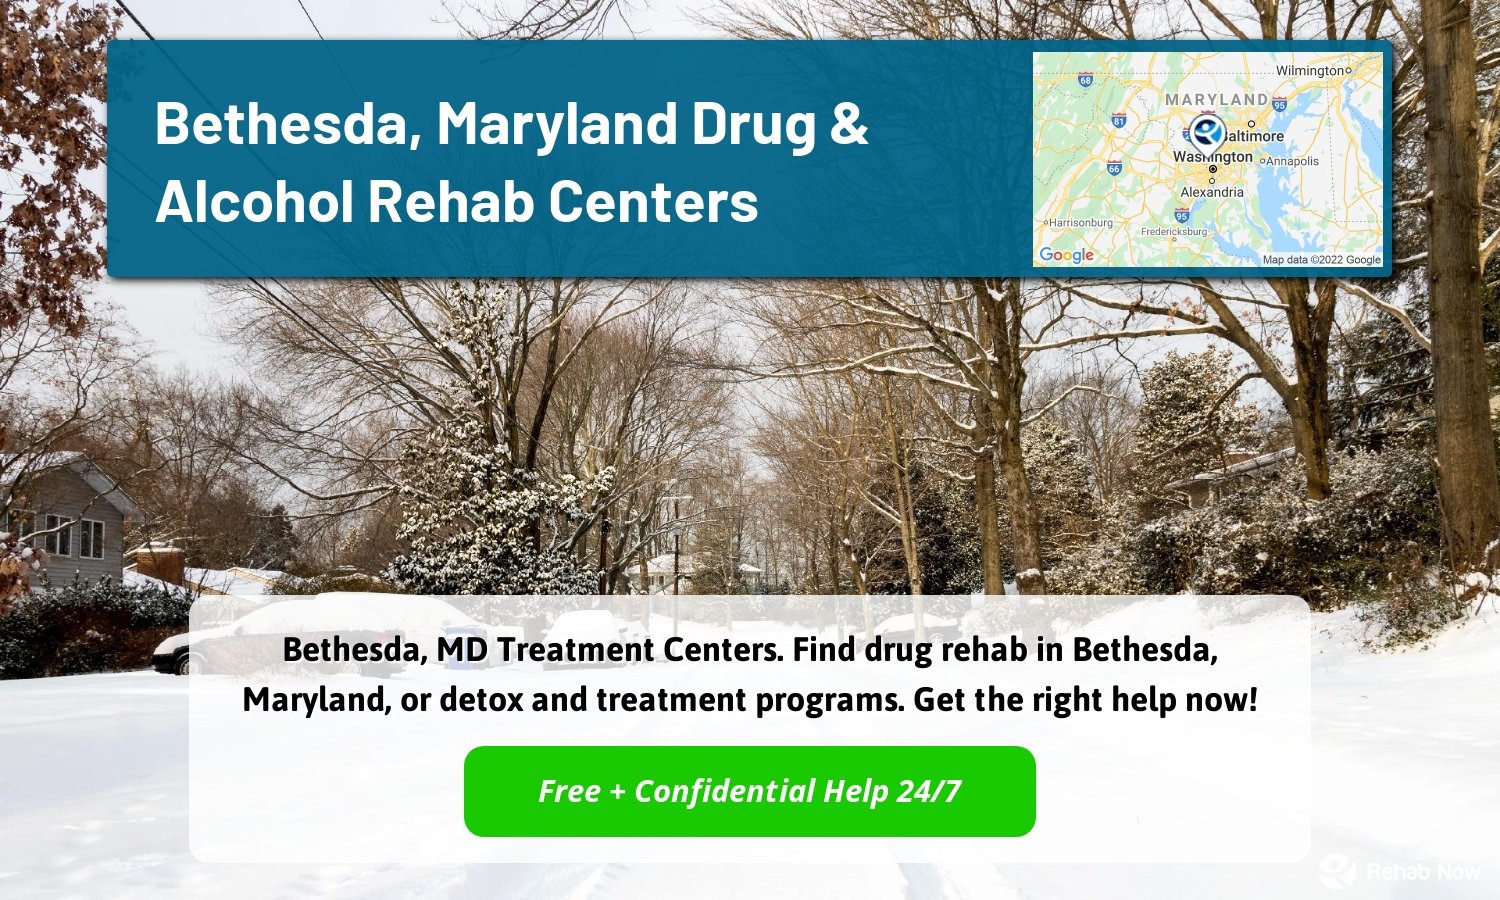 Bethesda, MD Treatment Centers. Find drug rehab in Bethesda, Maryland, or detox and treatment programs. Get the right help now!